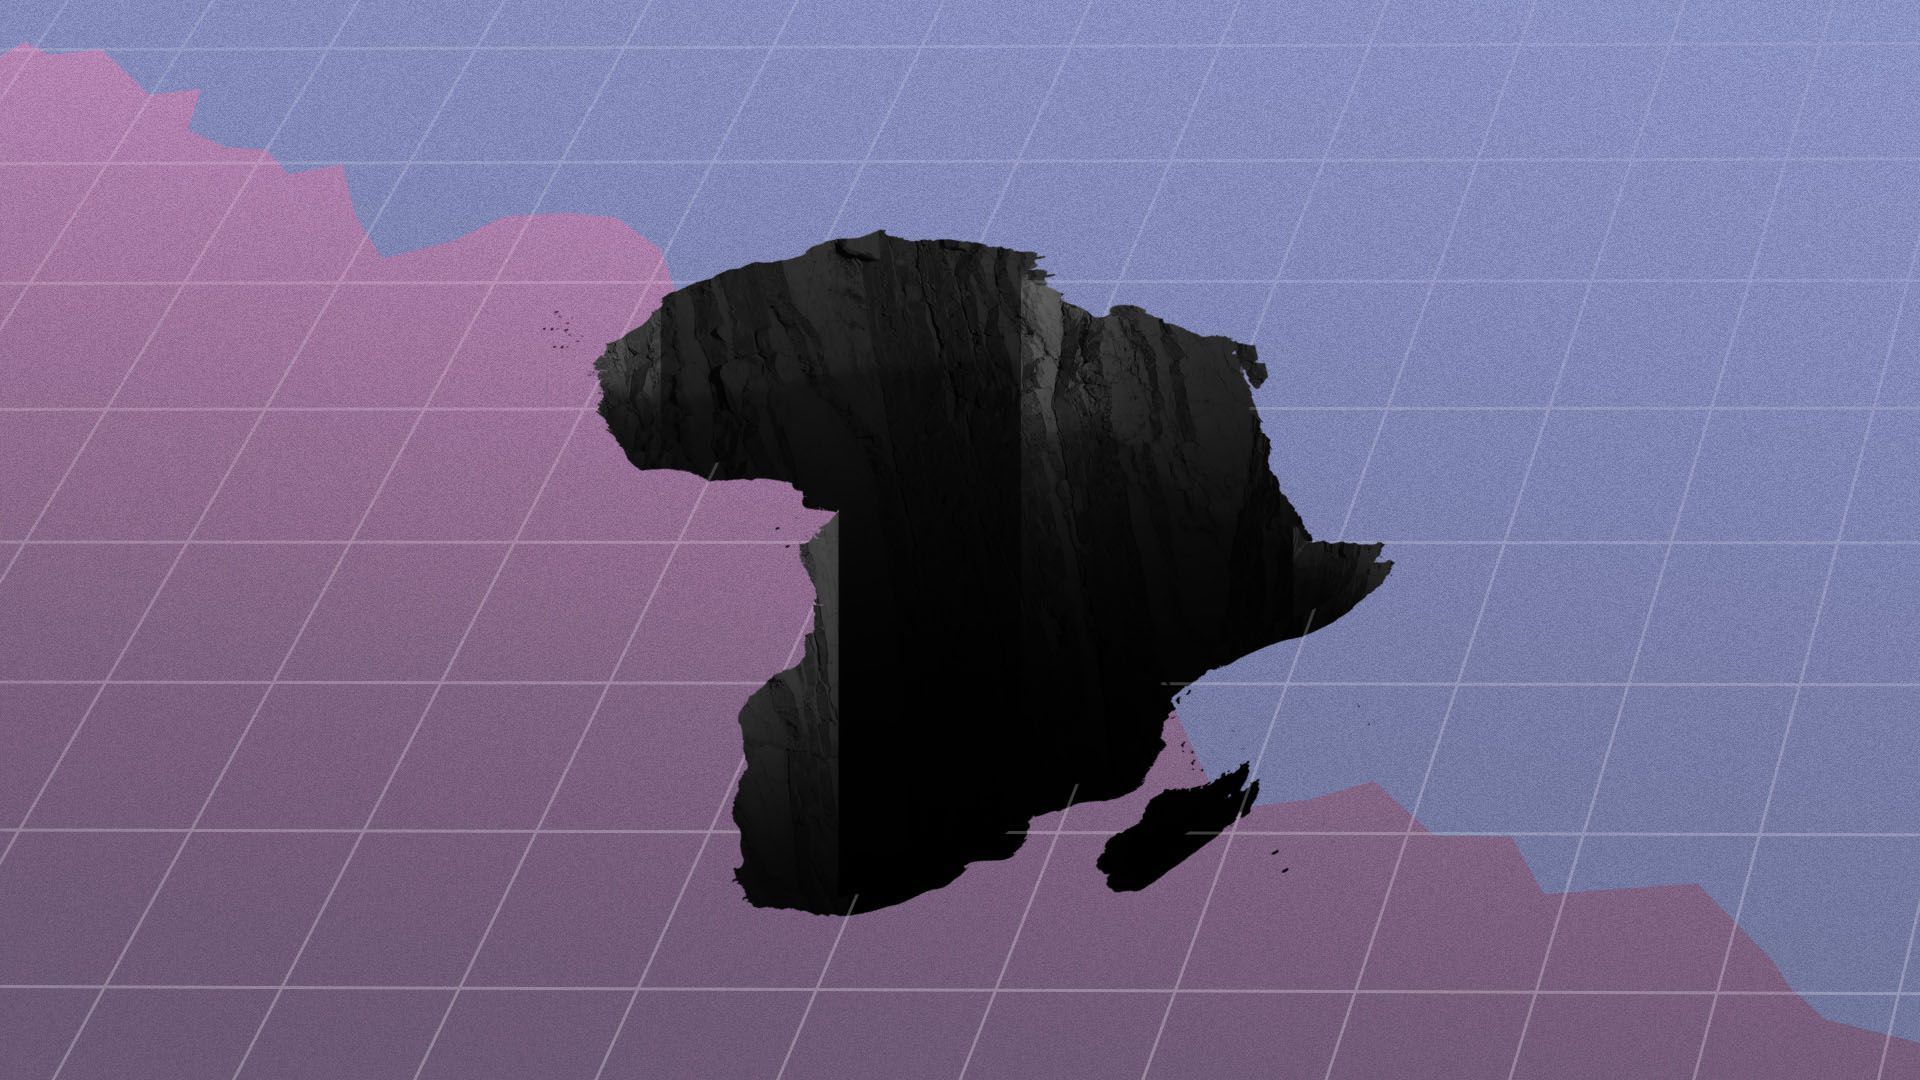 Illustration of a downward trending chart with a hole in the shape of the African continent in the middle